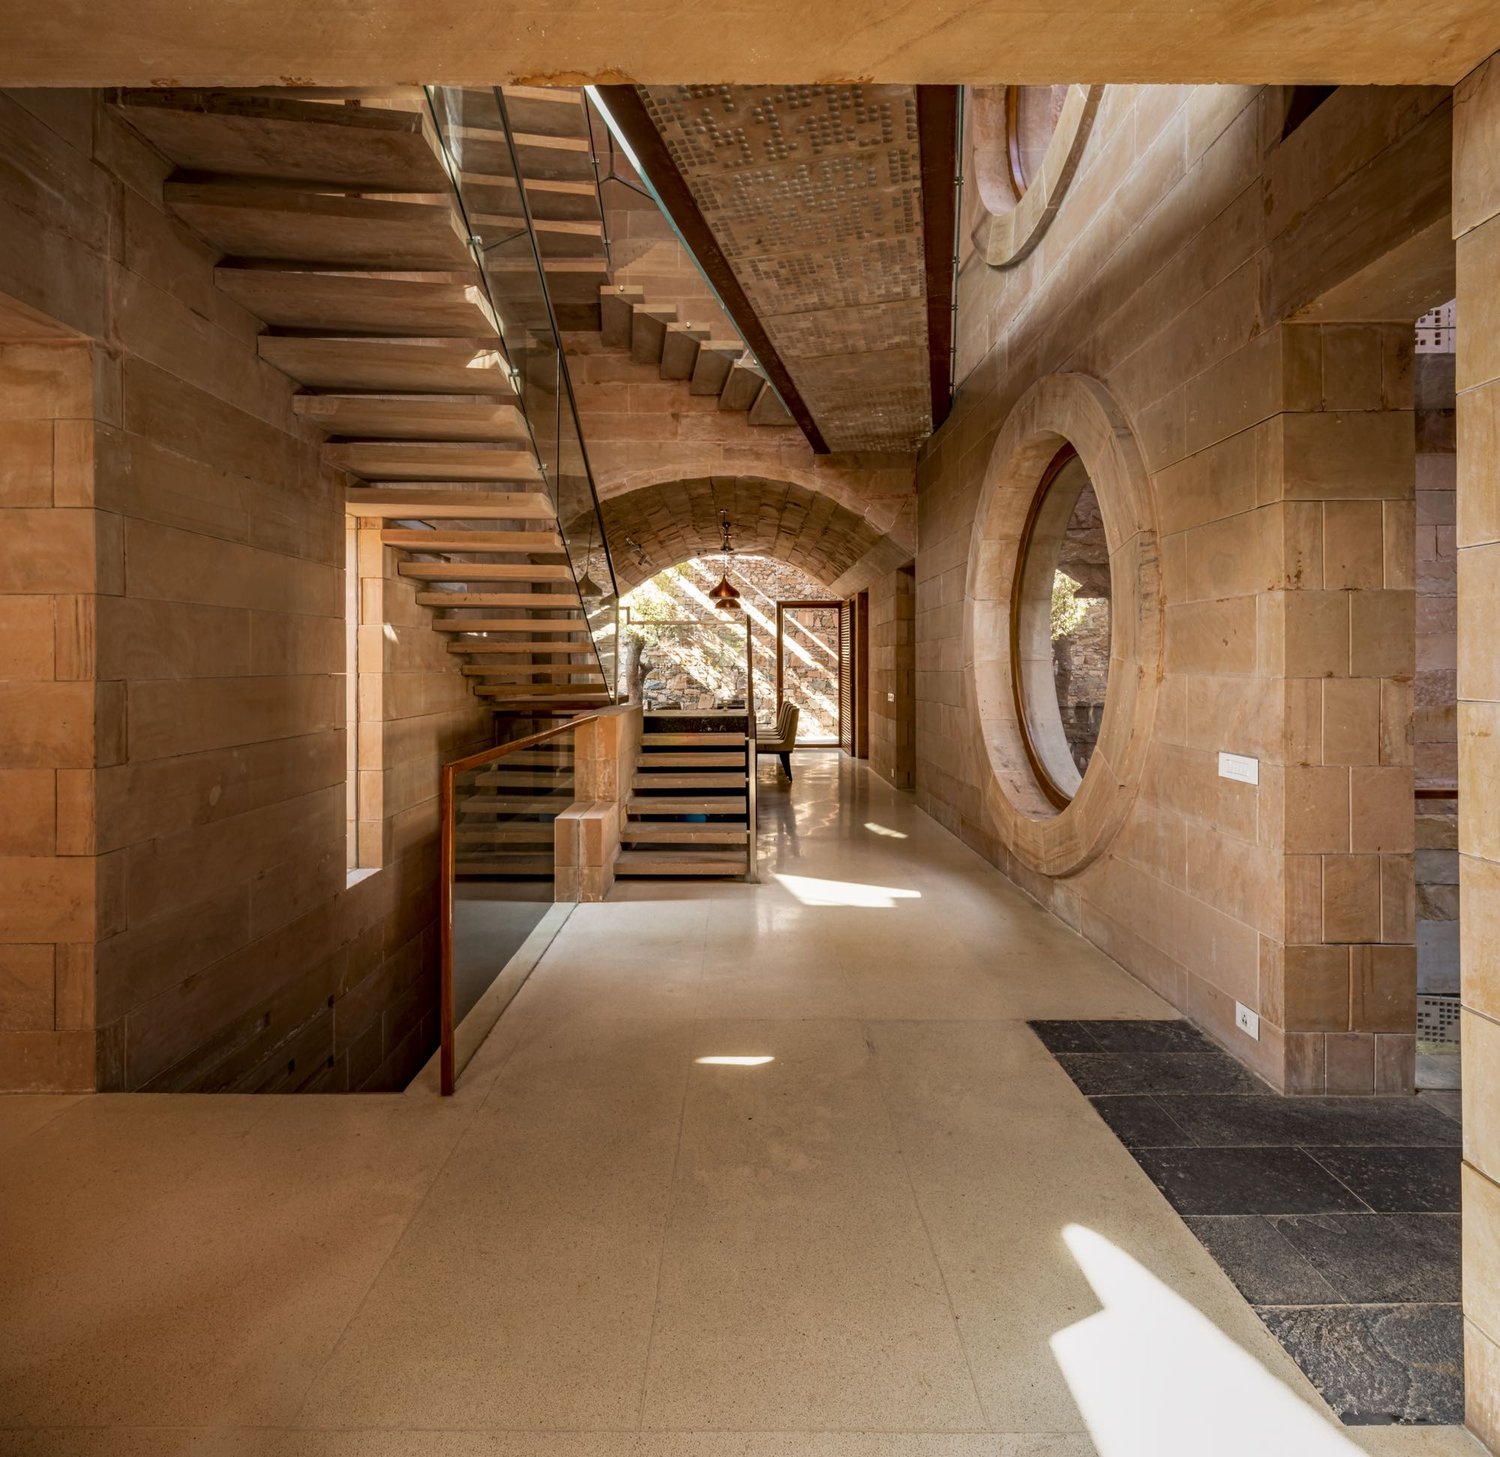 The Central Inner Void binds the house and creates shaded links to its different parts. Within this space, the morphology of the stone building elements are revealed. It has a labyrinthine quality, like a | Bharath Ramamrutham